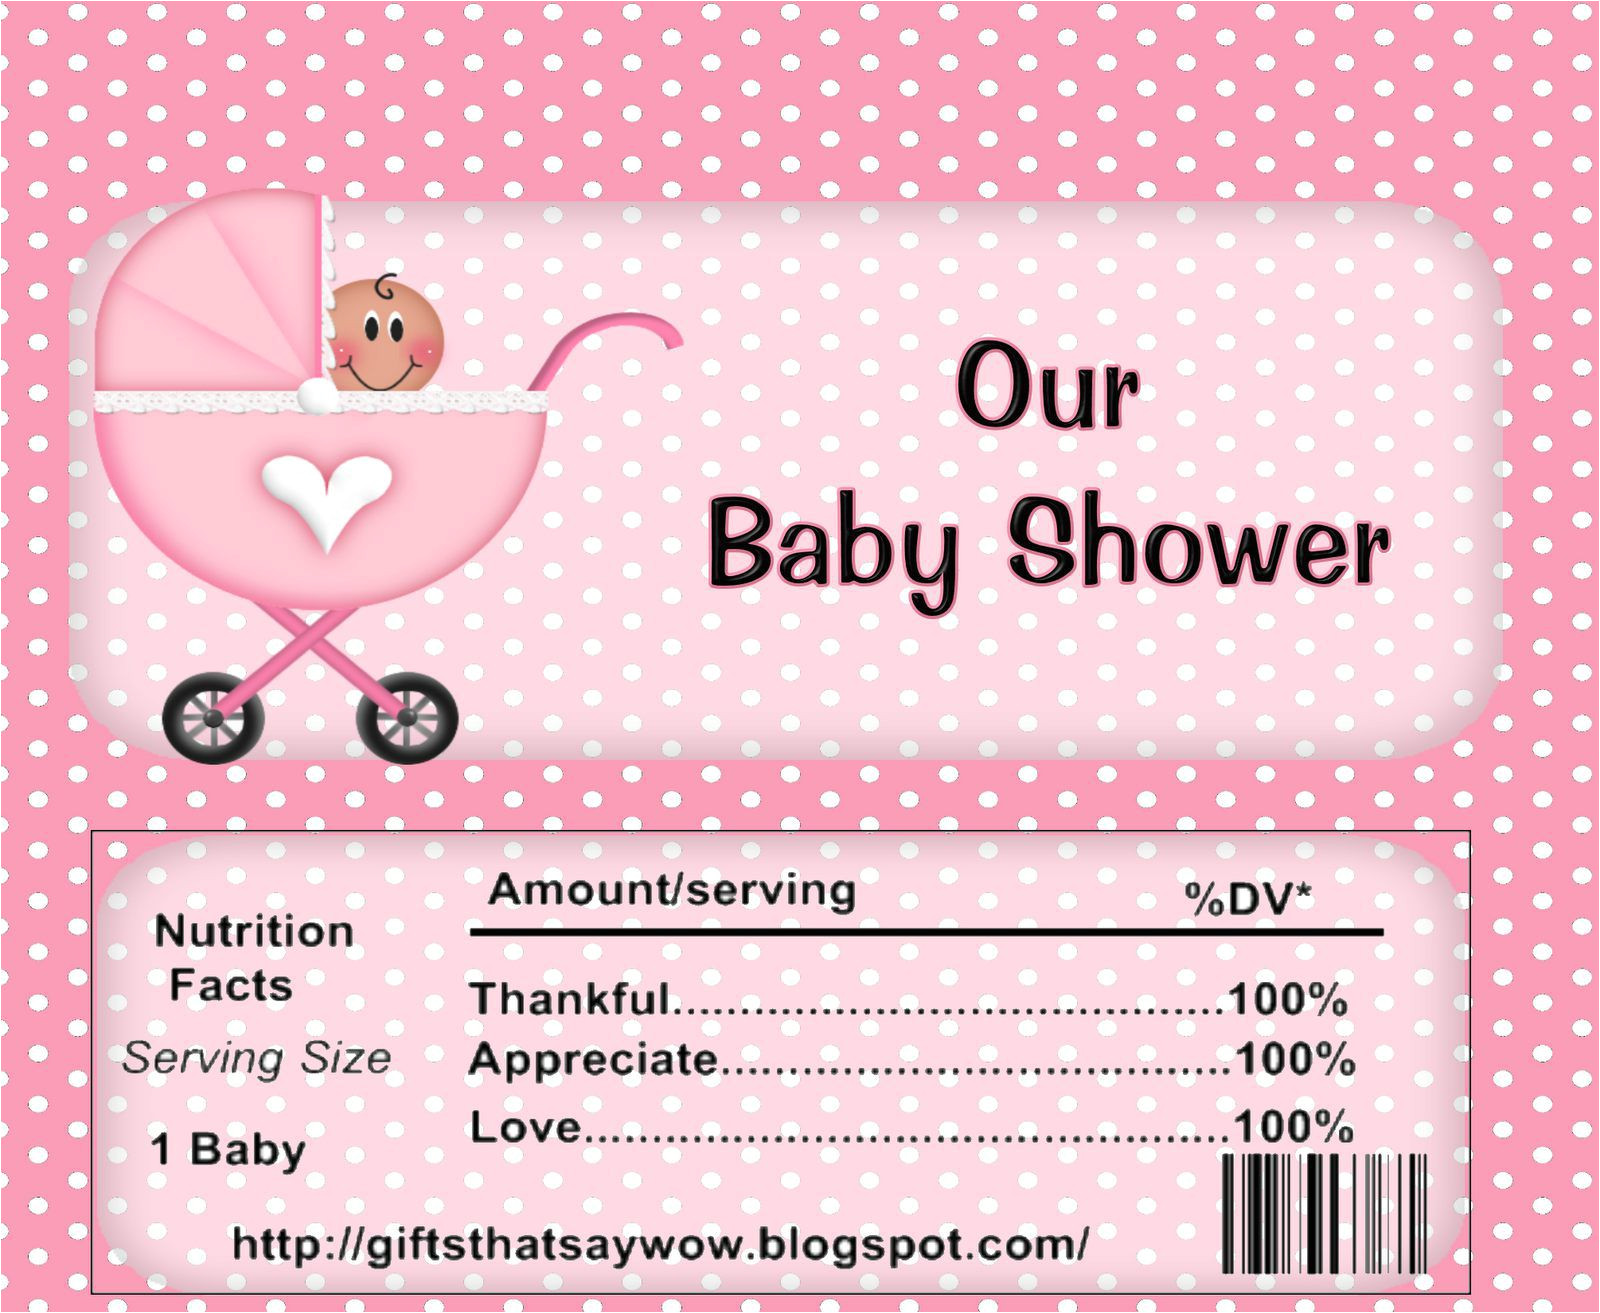 baby shower invitations templates